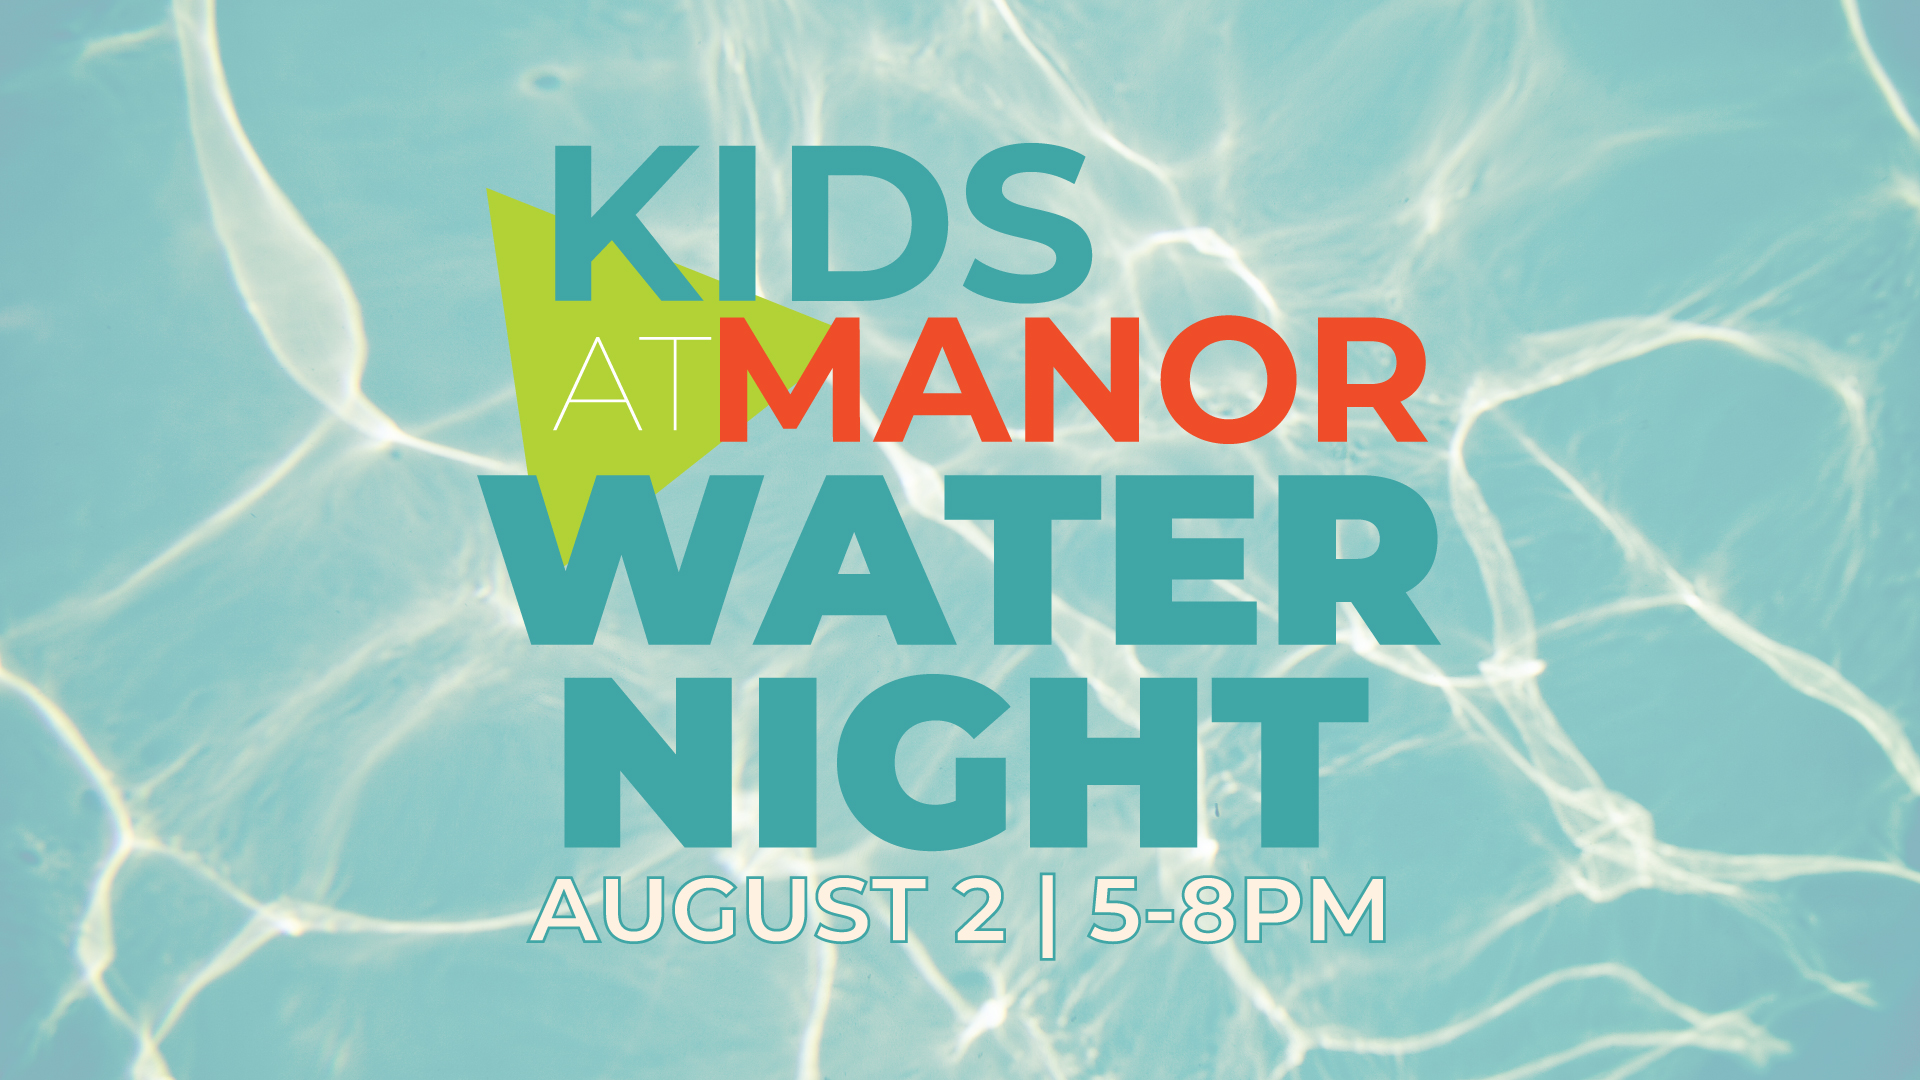 Kids at Manor Water Night | August 2 from 5-8PM.